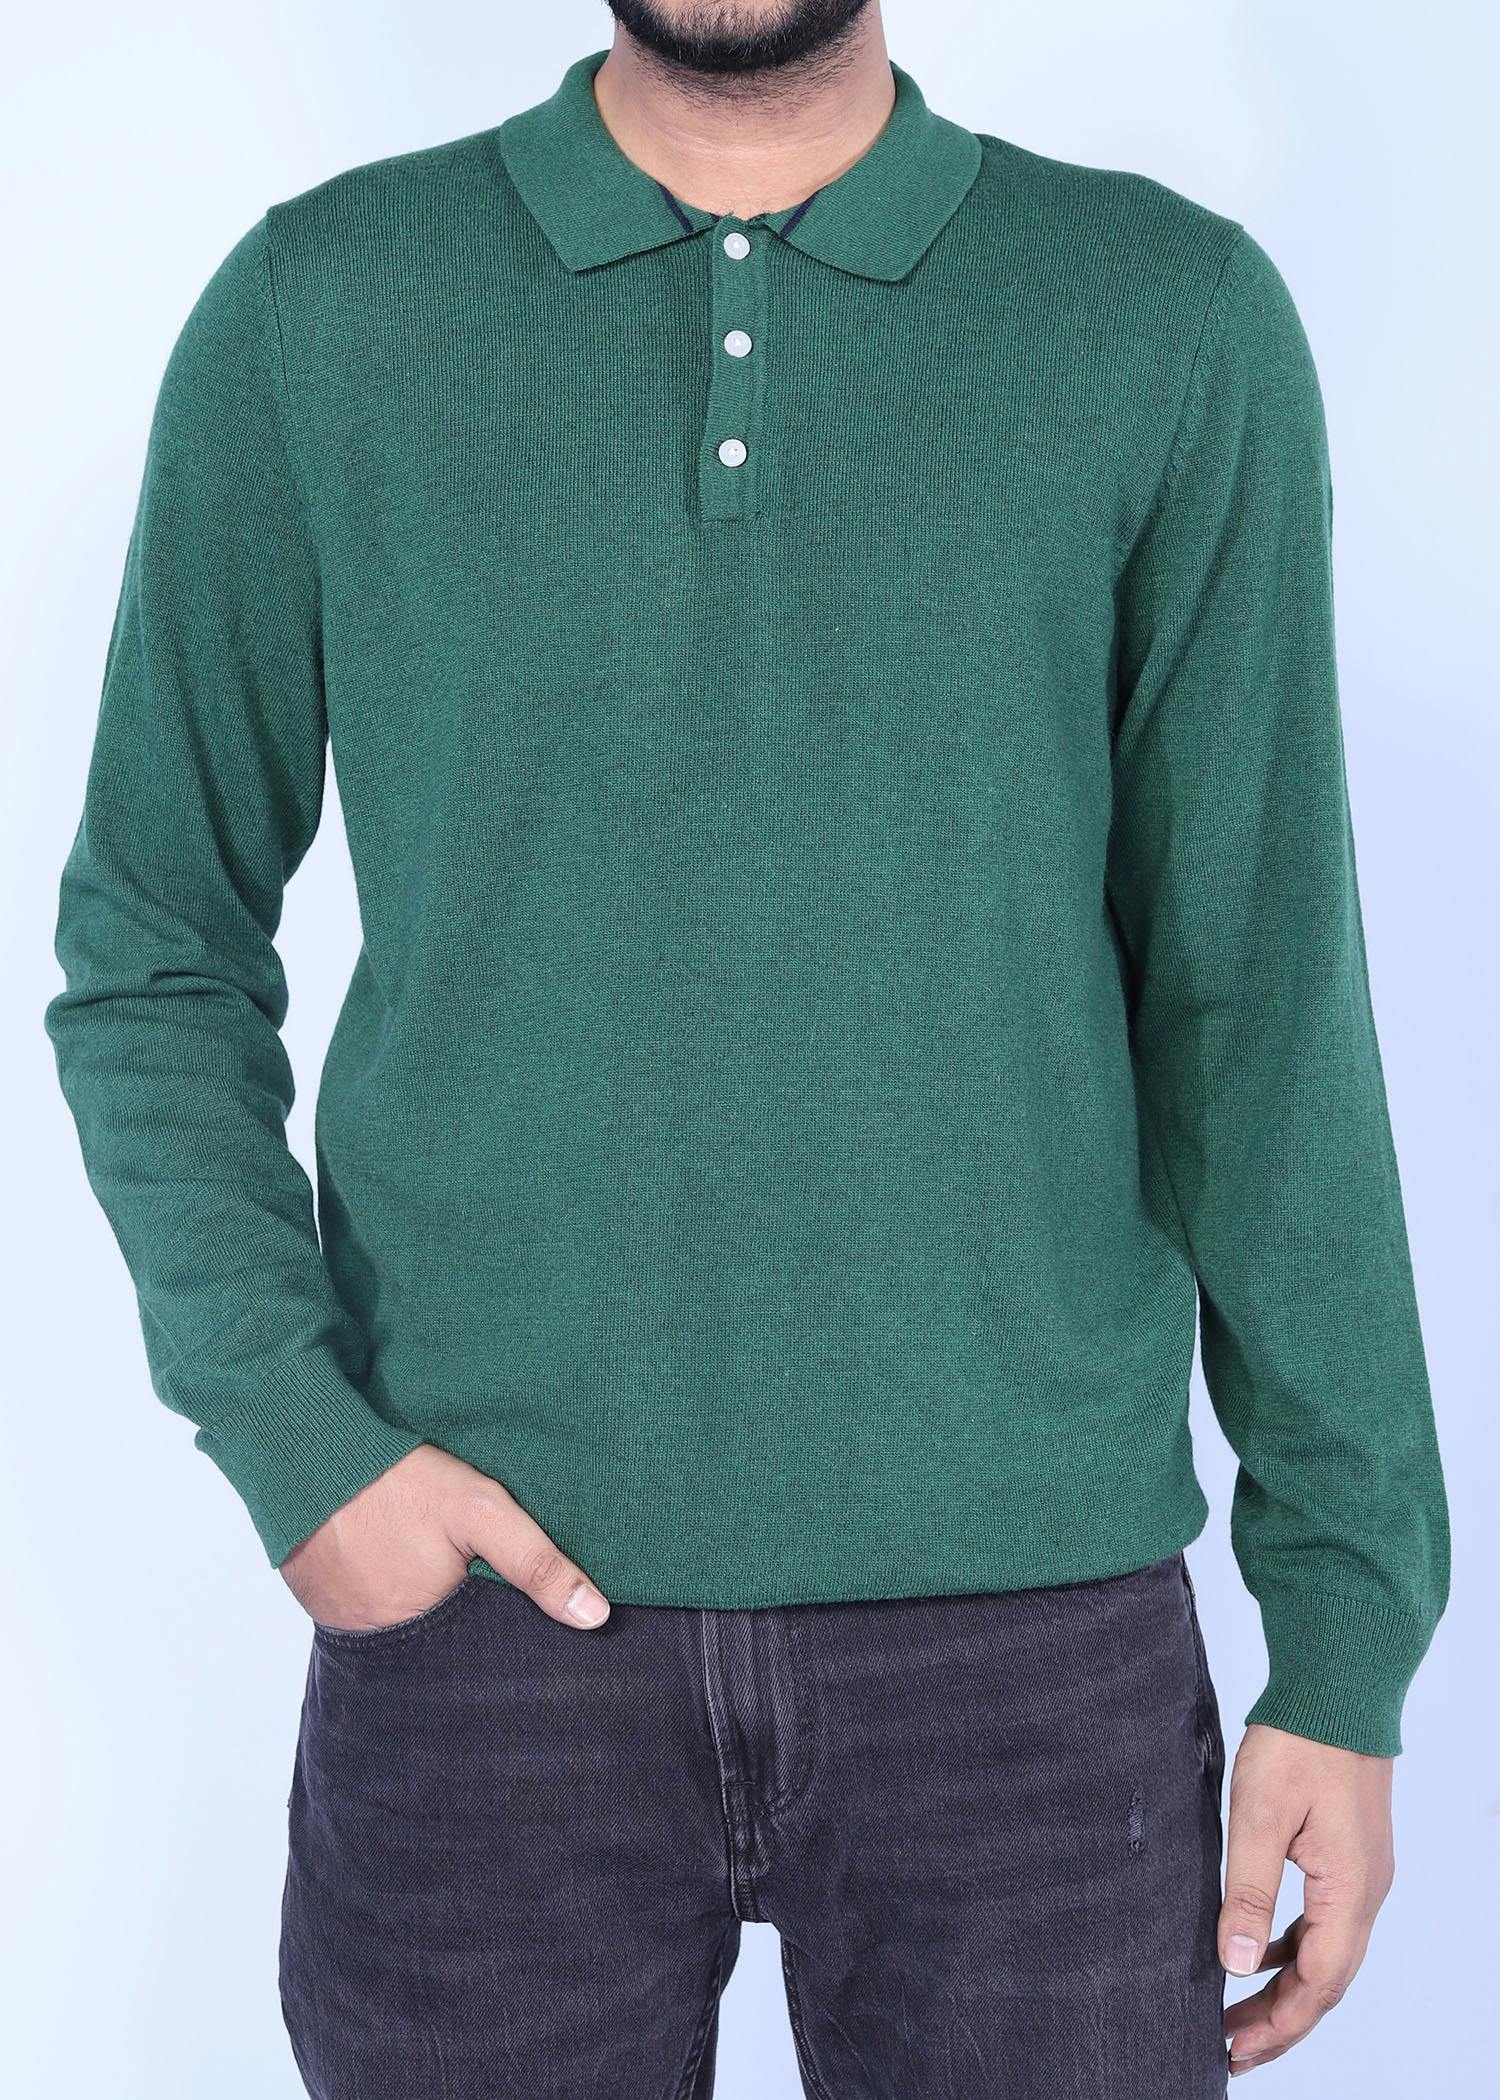 athens sweater green color half front view